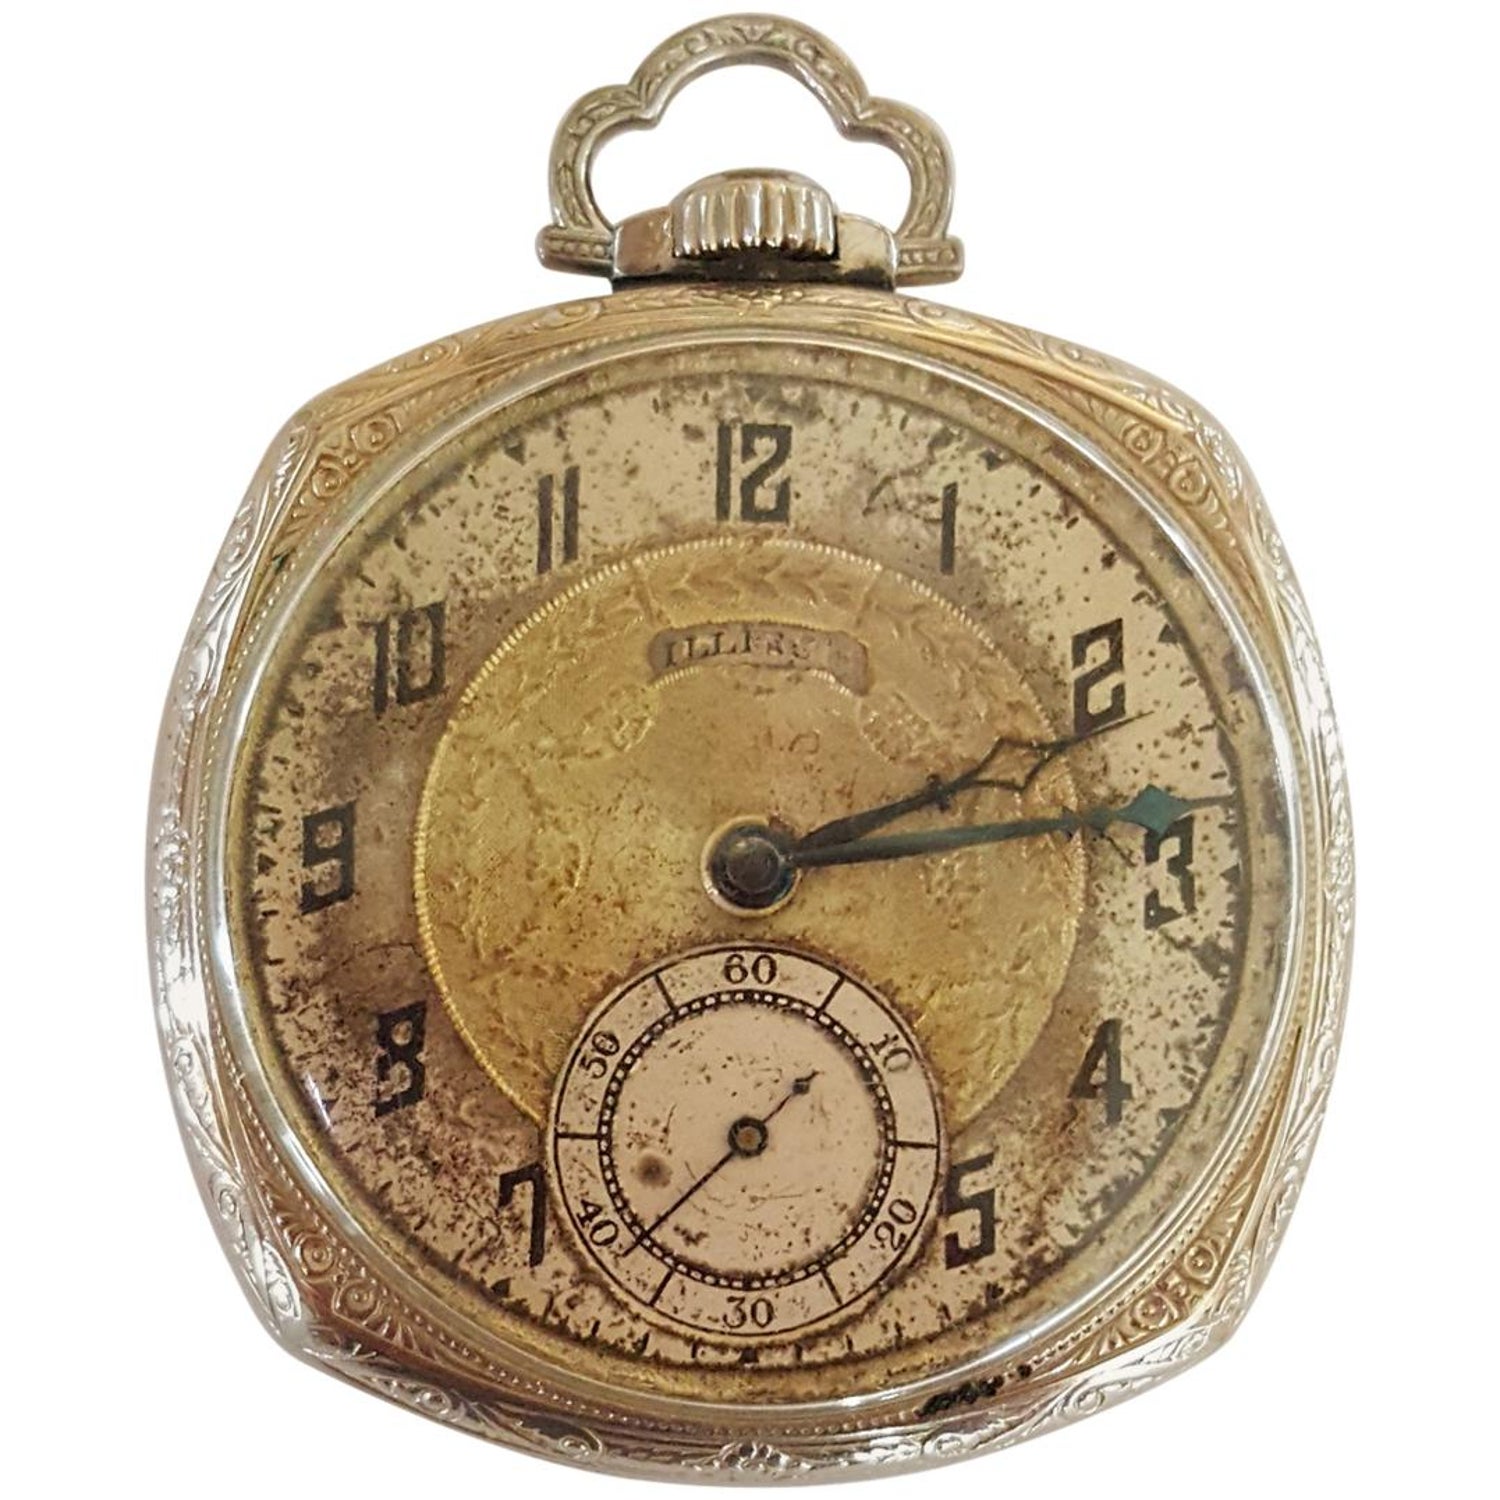 How do you open an illinois pocket watch?